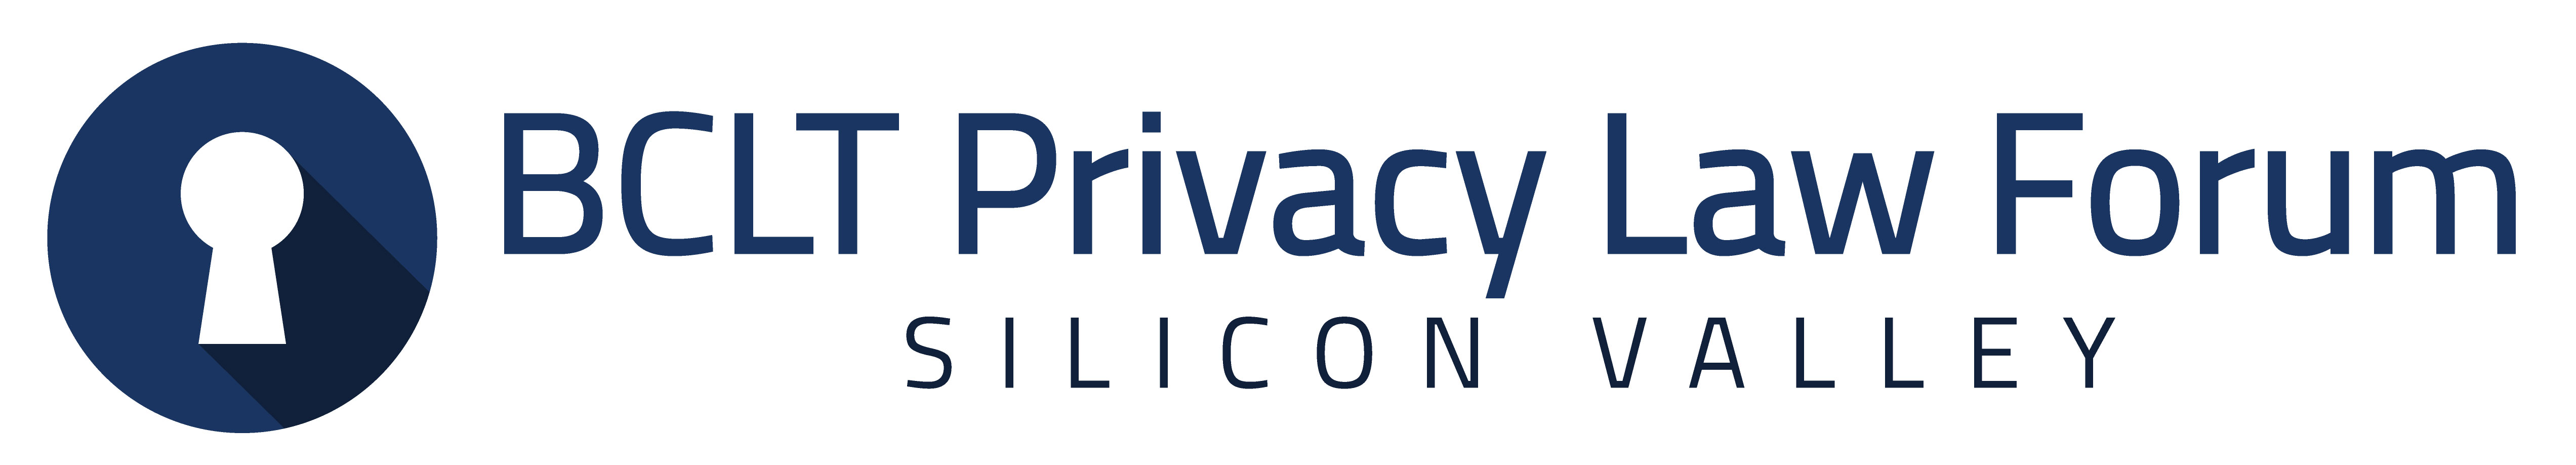 The 5th Annual BCLT Privacy Law Forum: Silicon Valley